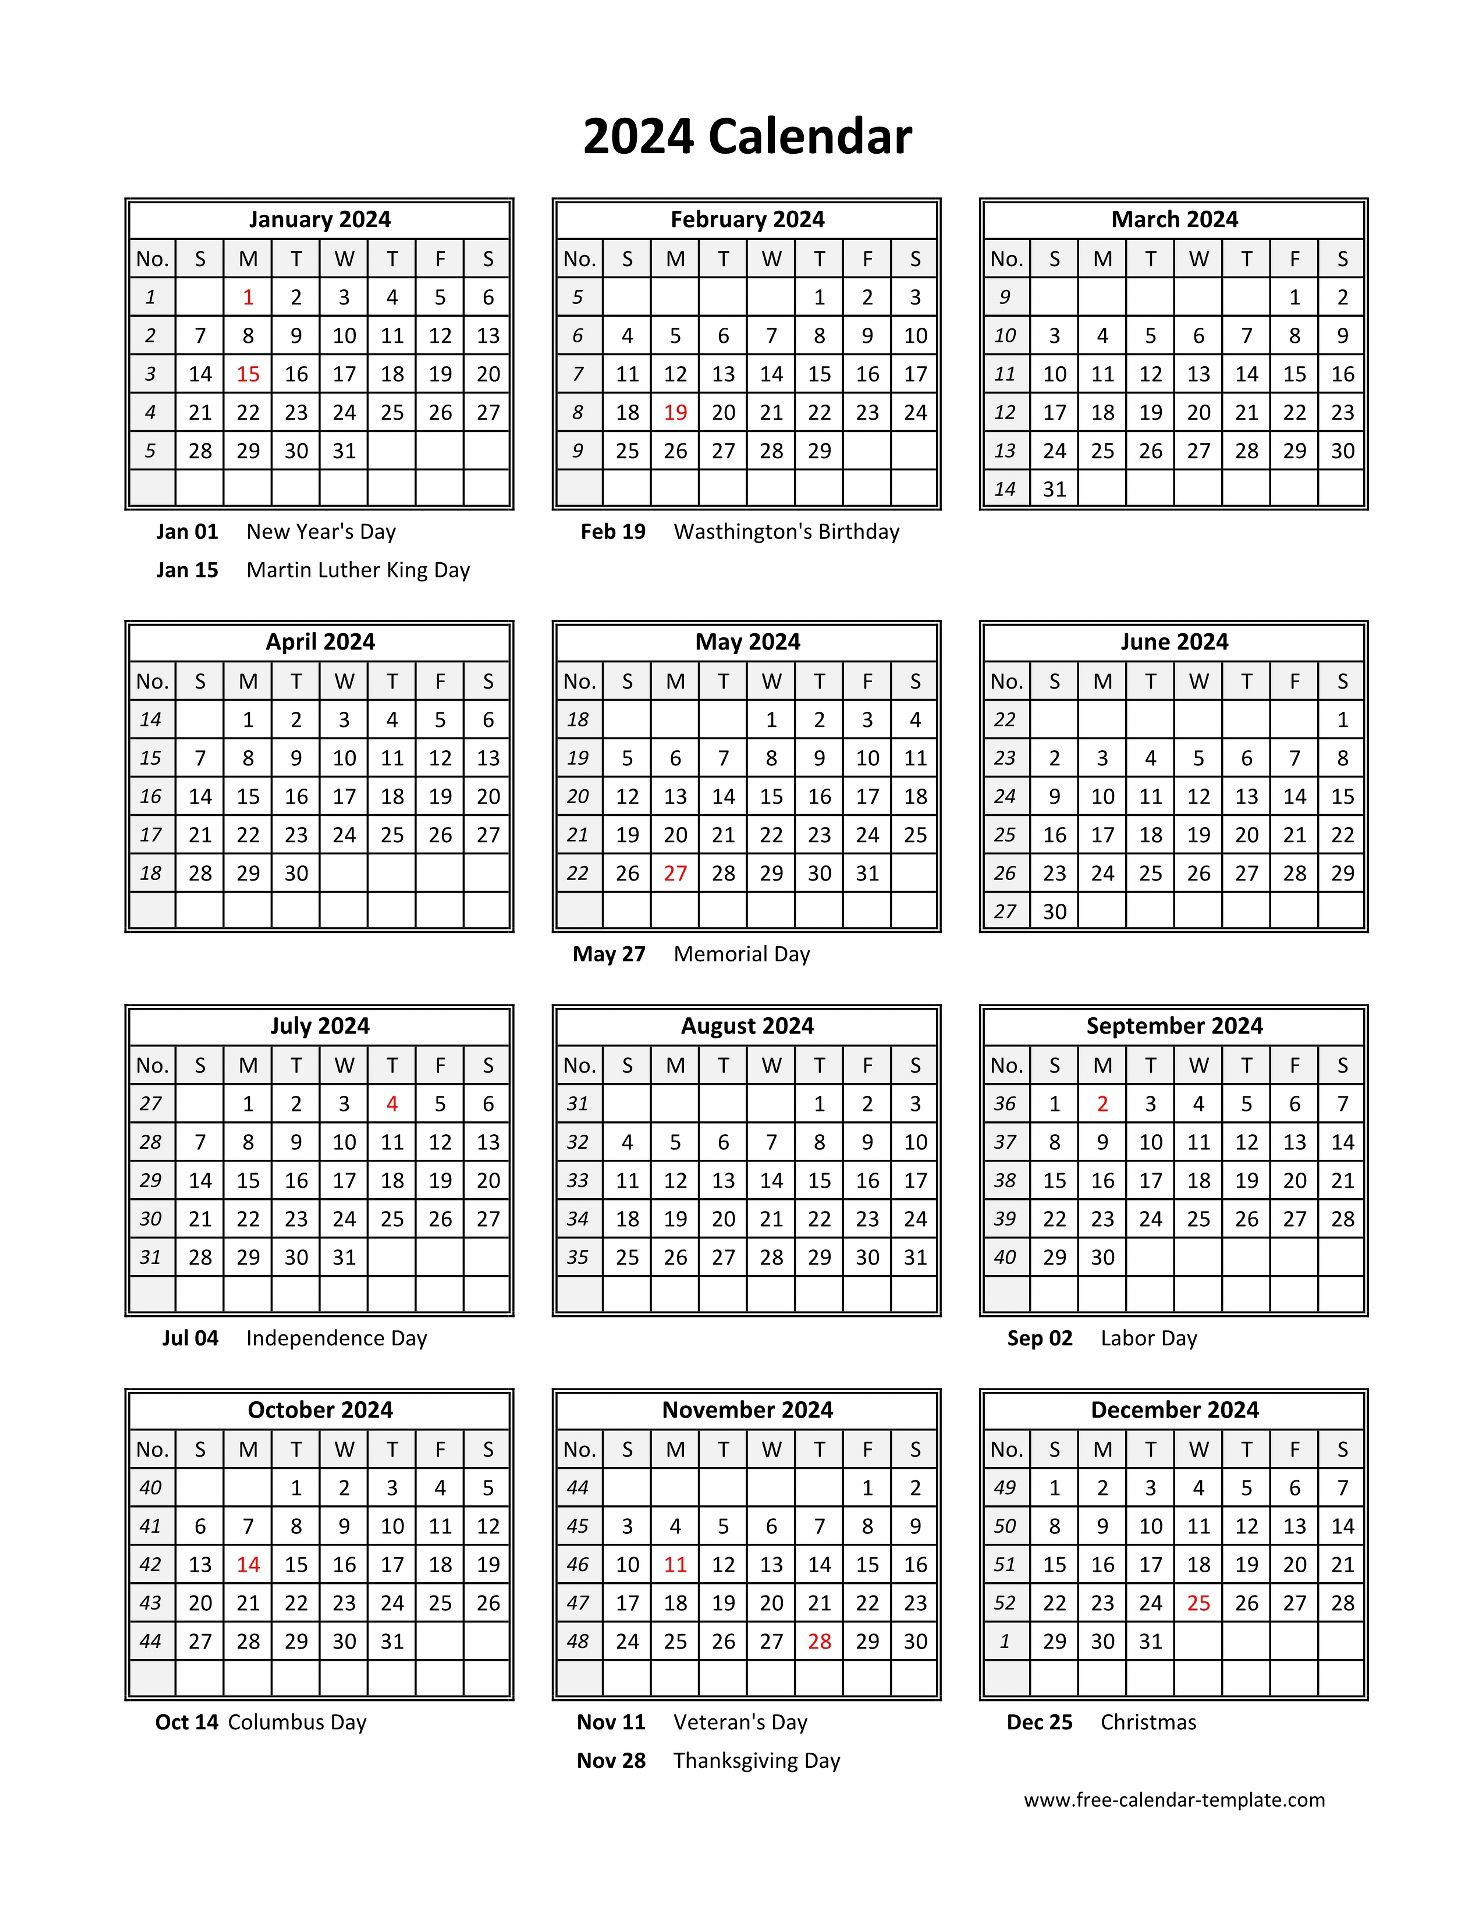 Yearly Printable Calendar 2024 With Holidays | Free-Calendar | 2024 Yearly Calendar Printable Pdf Free